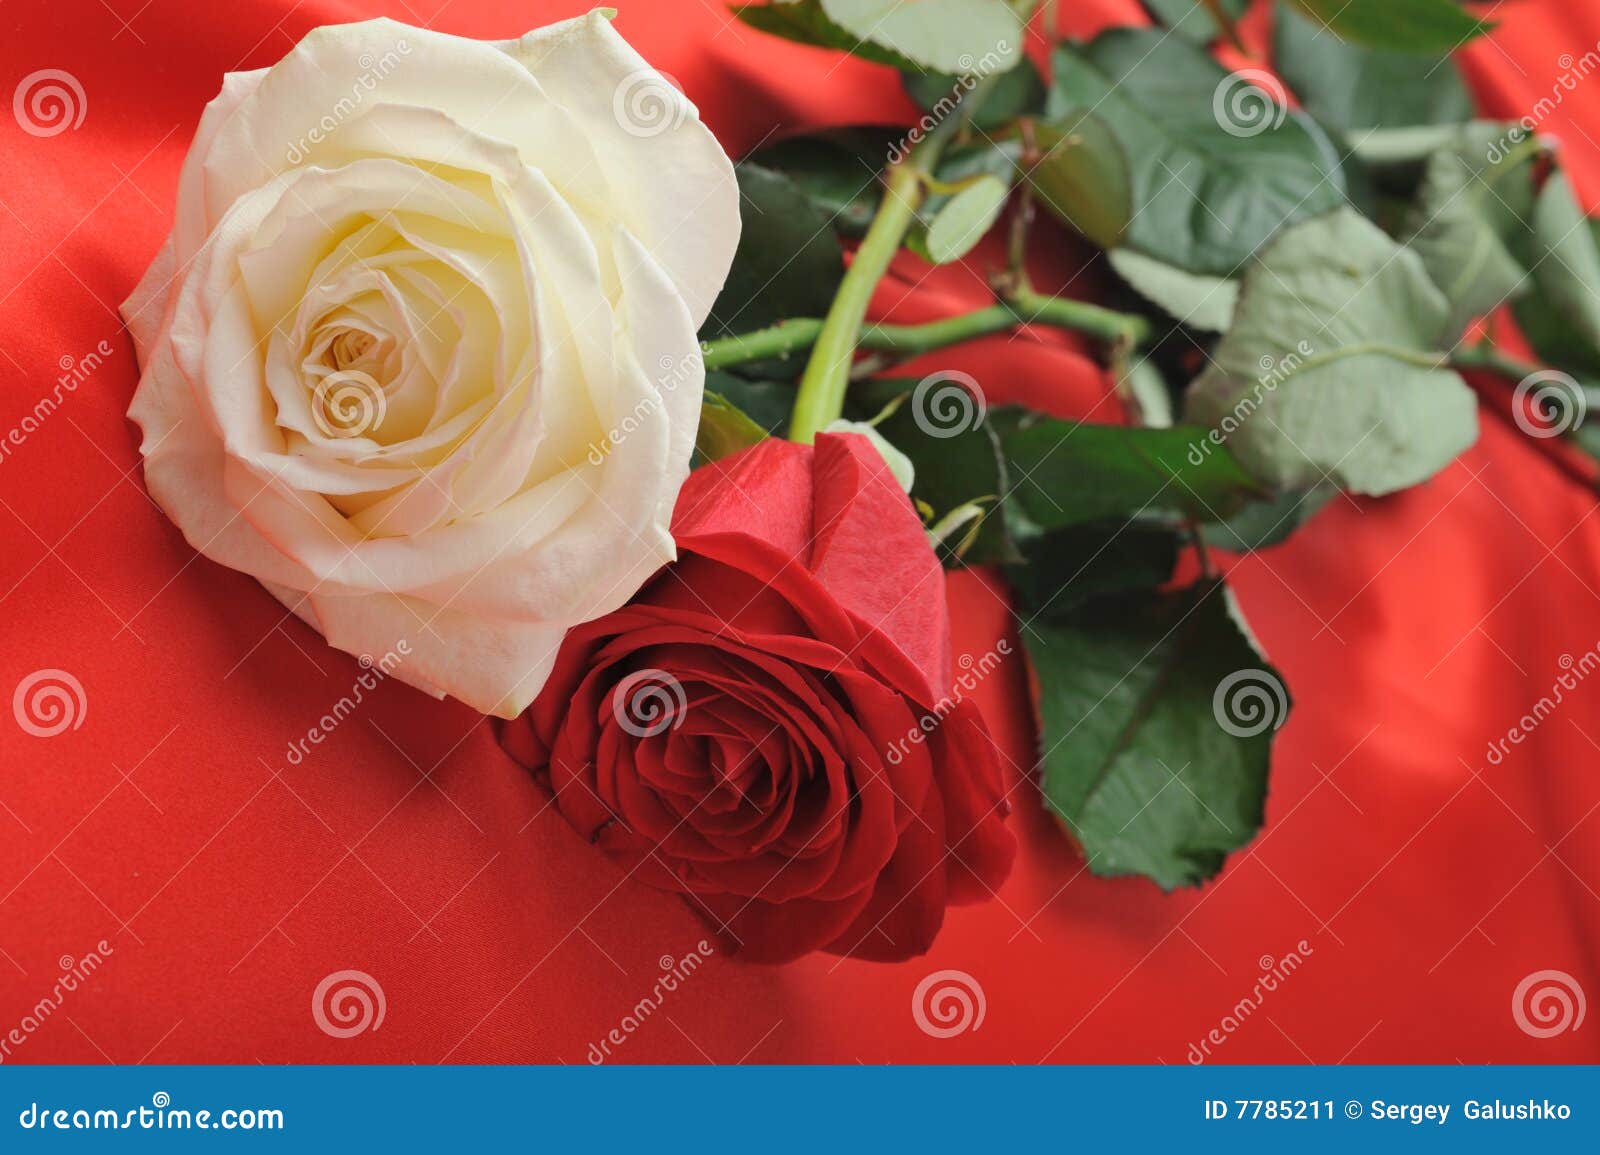 Two rose on satin stock image. Image of pattern, candid - 7785211